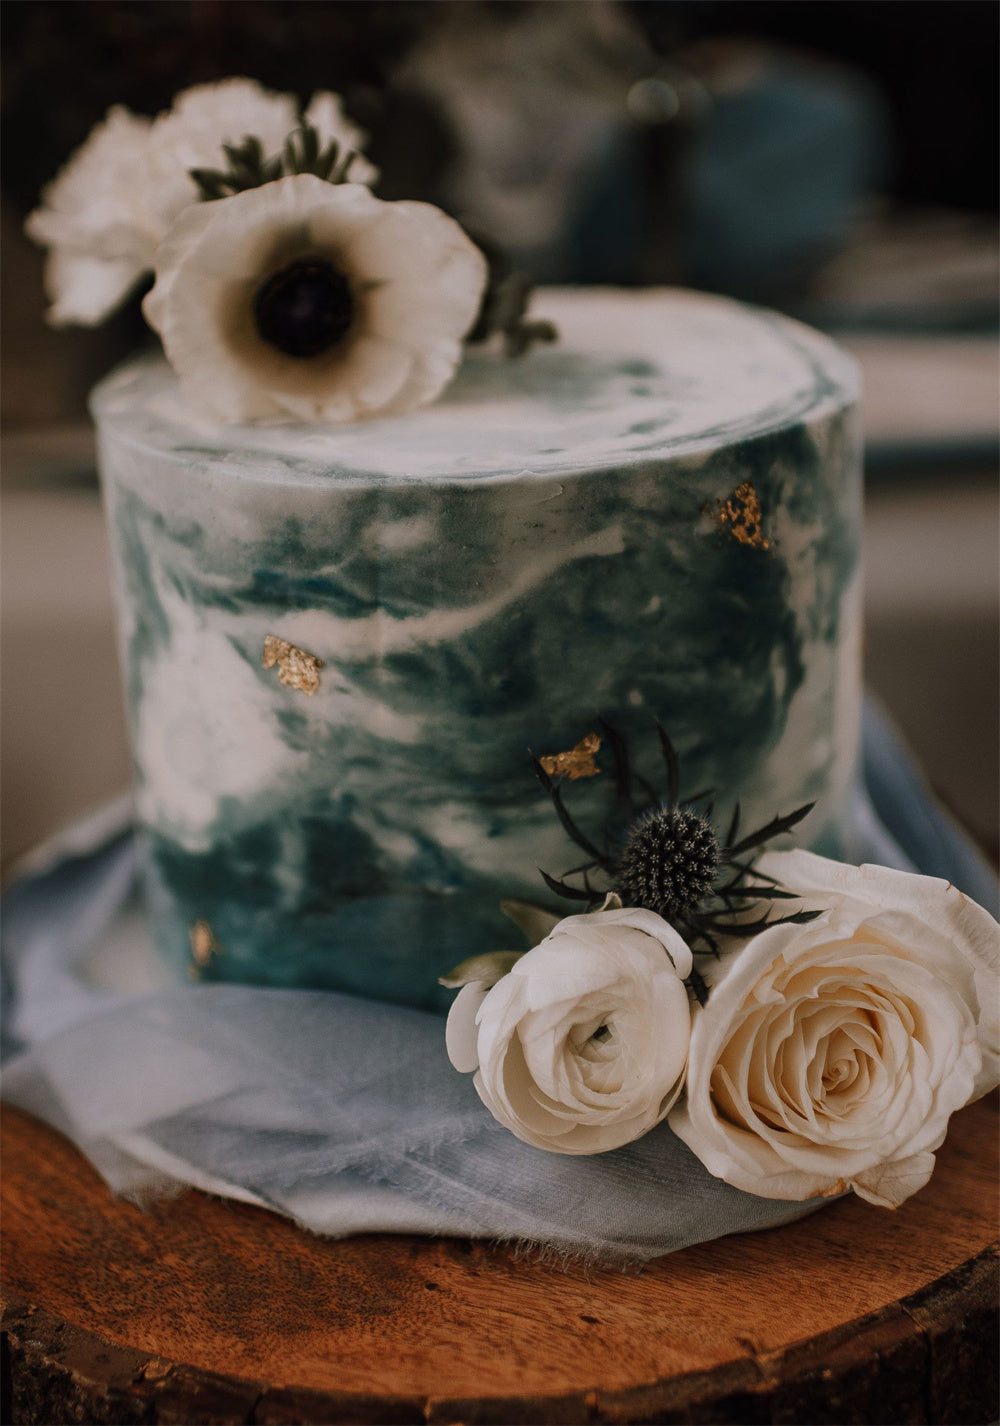 Creative Marble Wedding Cake Ideas with Artistic Form